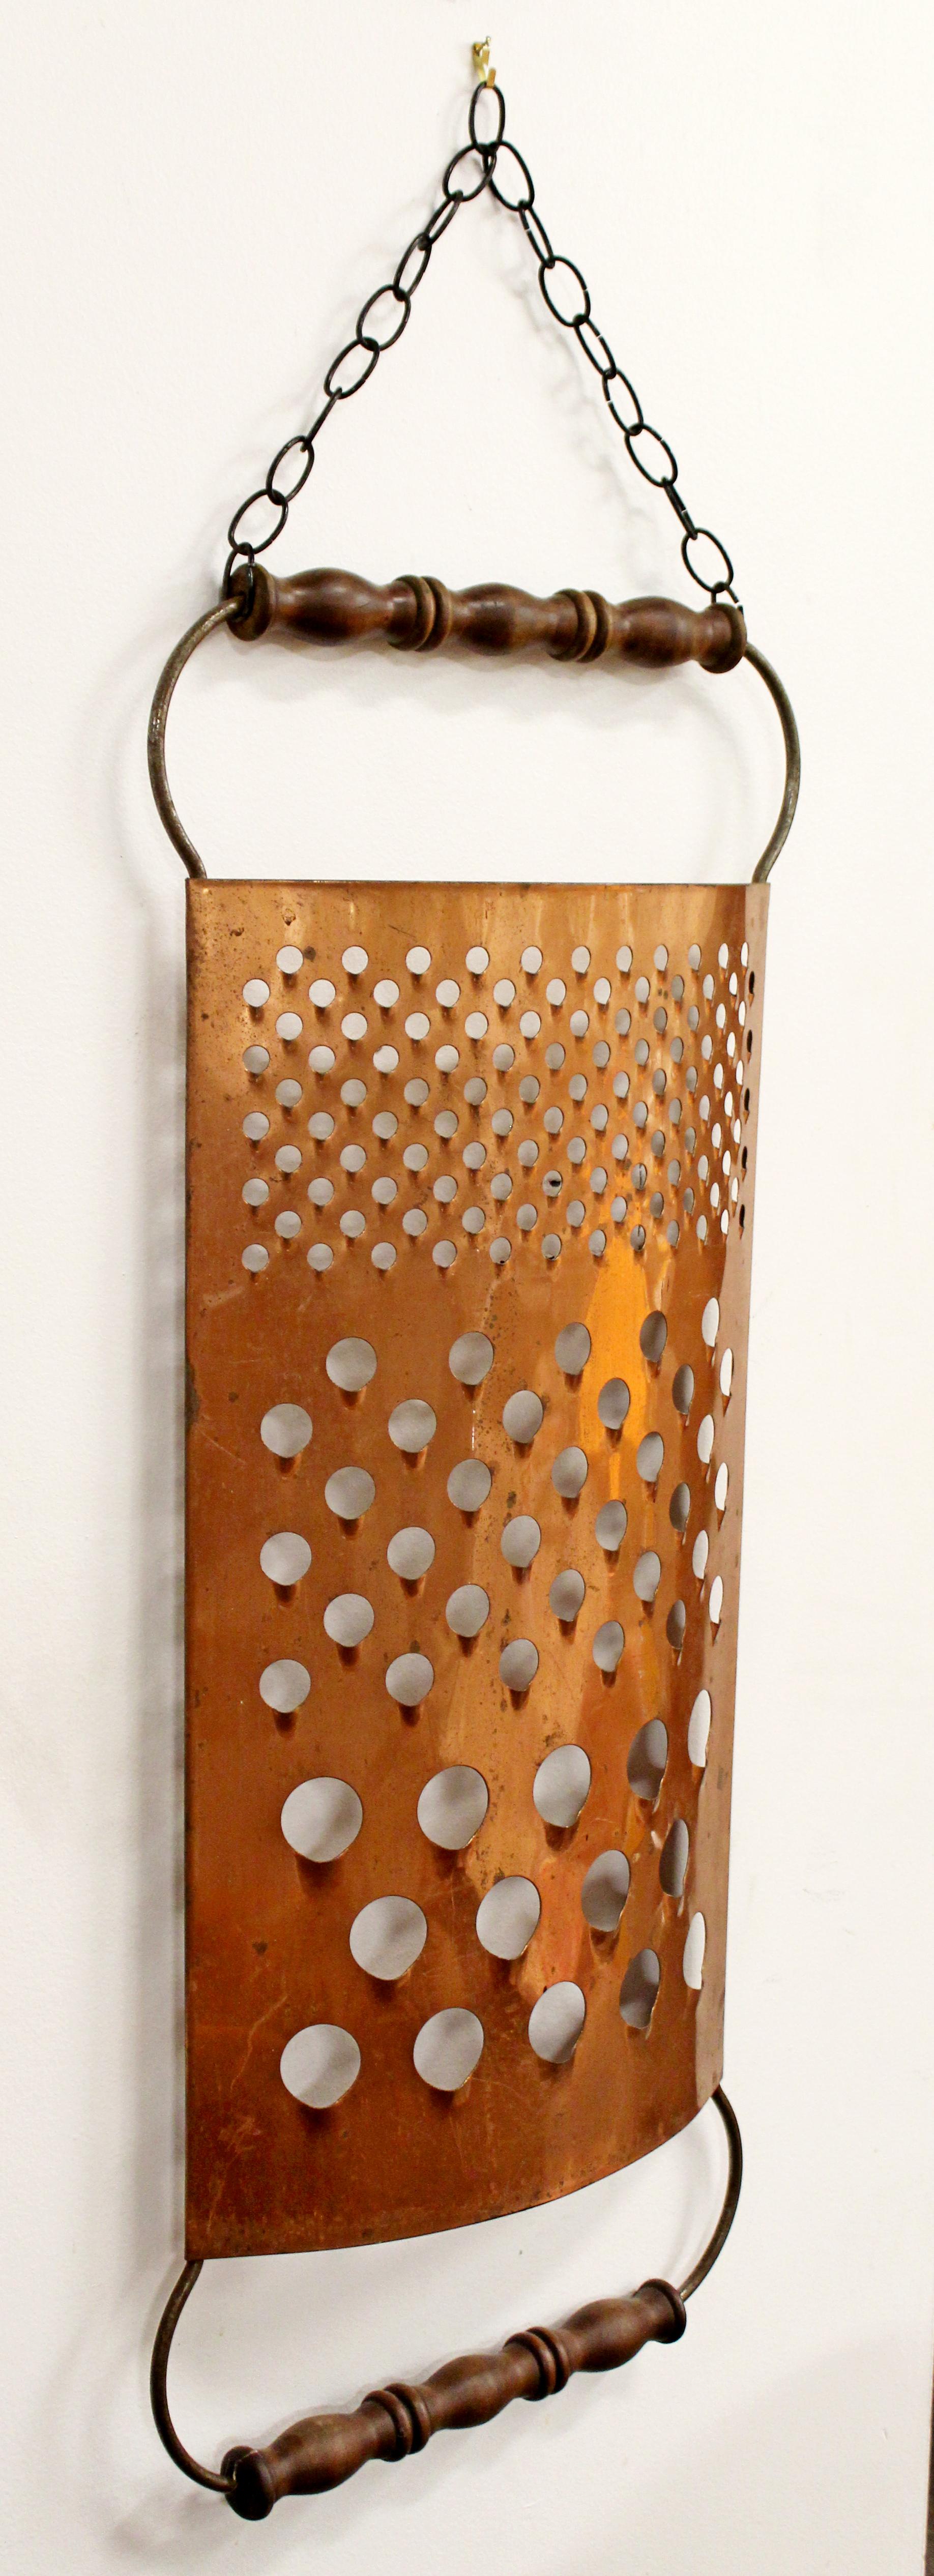 For your consideration is a creative, copper wall sculpture of a large cheese grater, signed by Curtis Jere, and dated 1979. In excellent vintage condition. The dimensions are 17